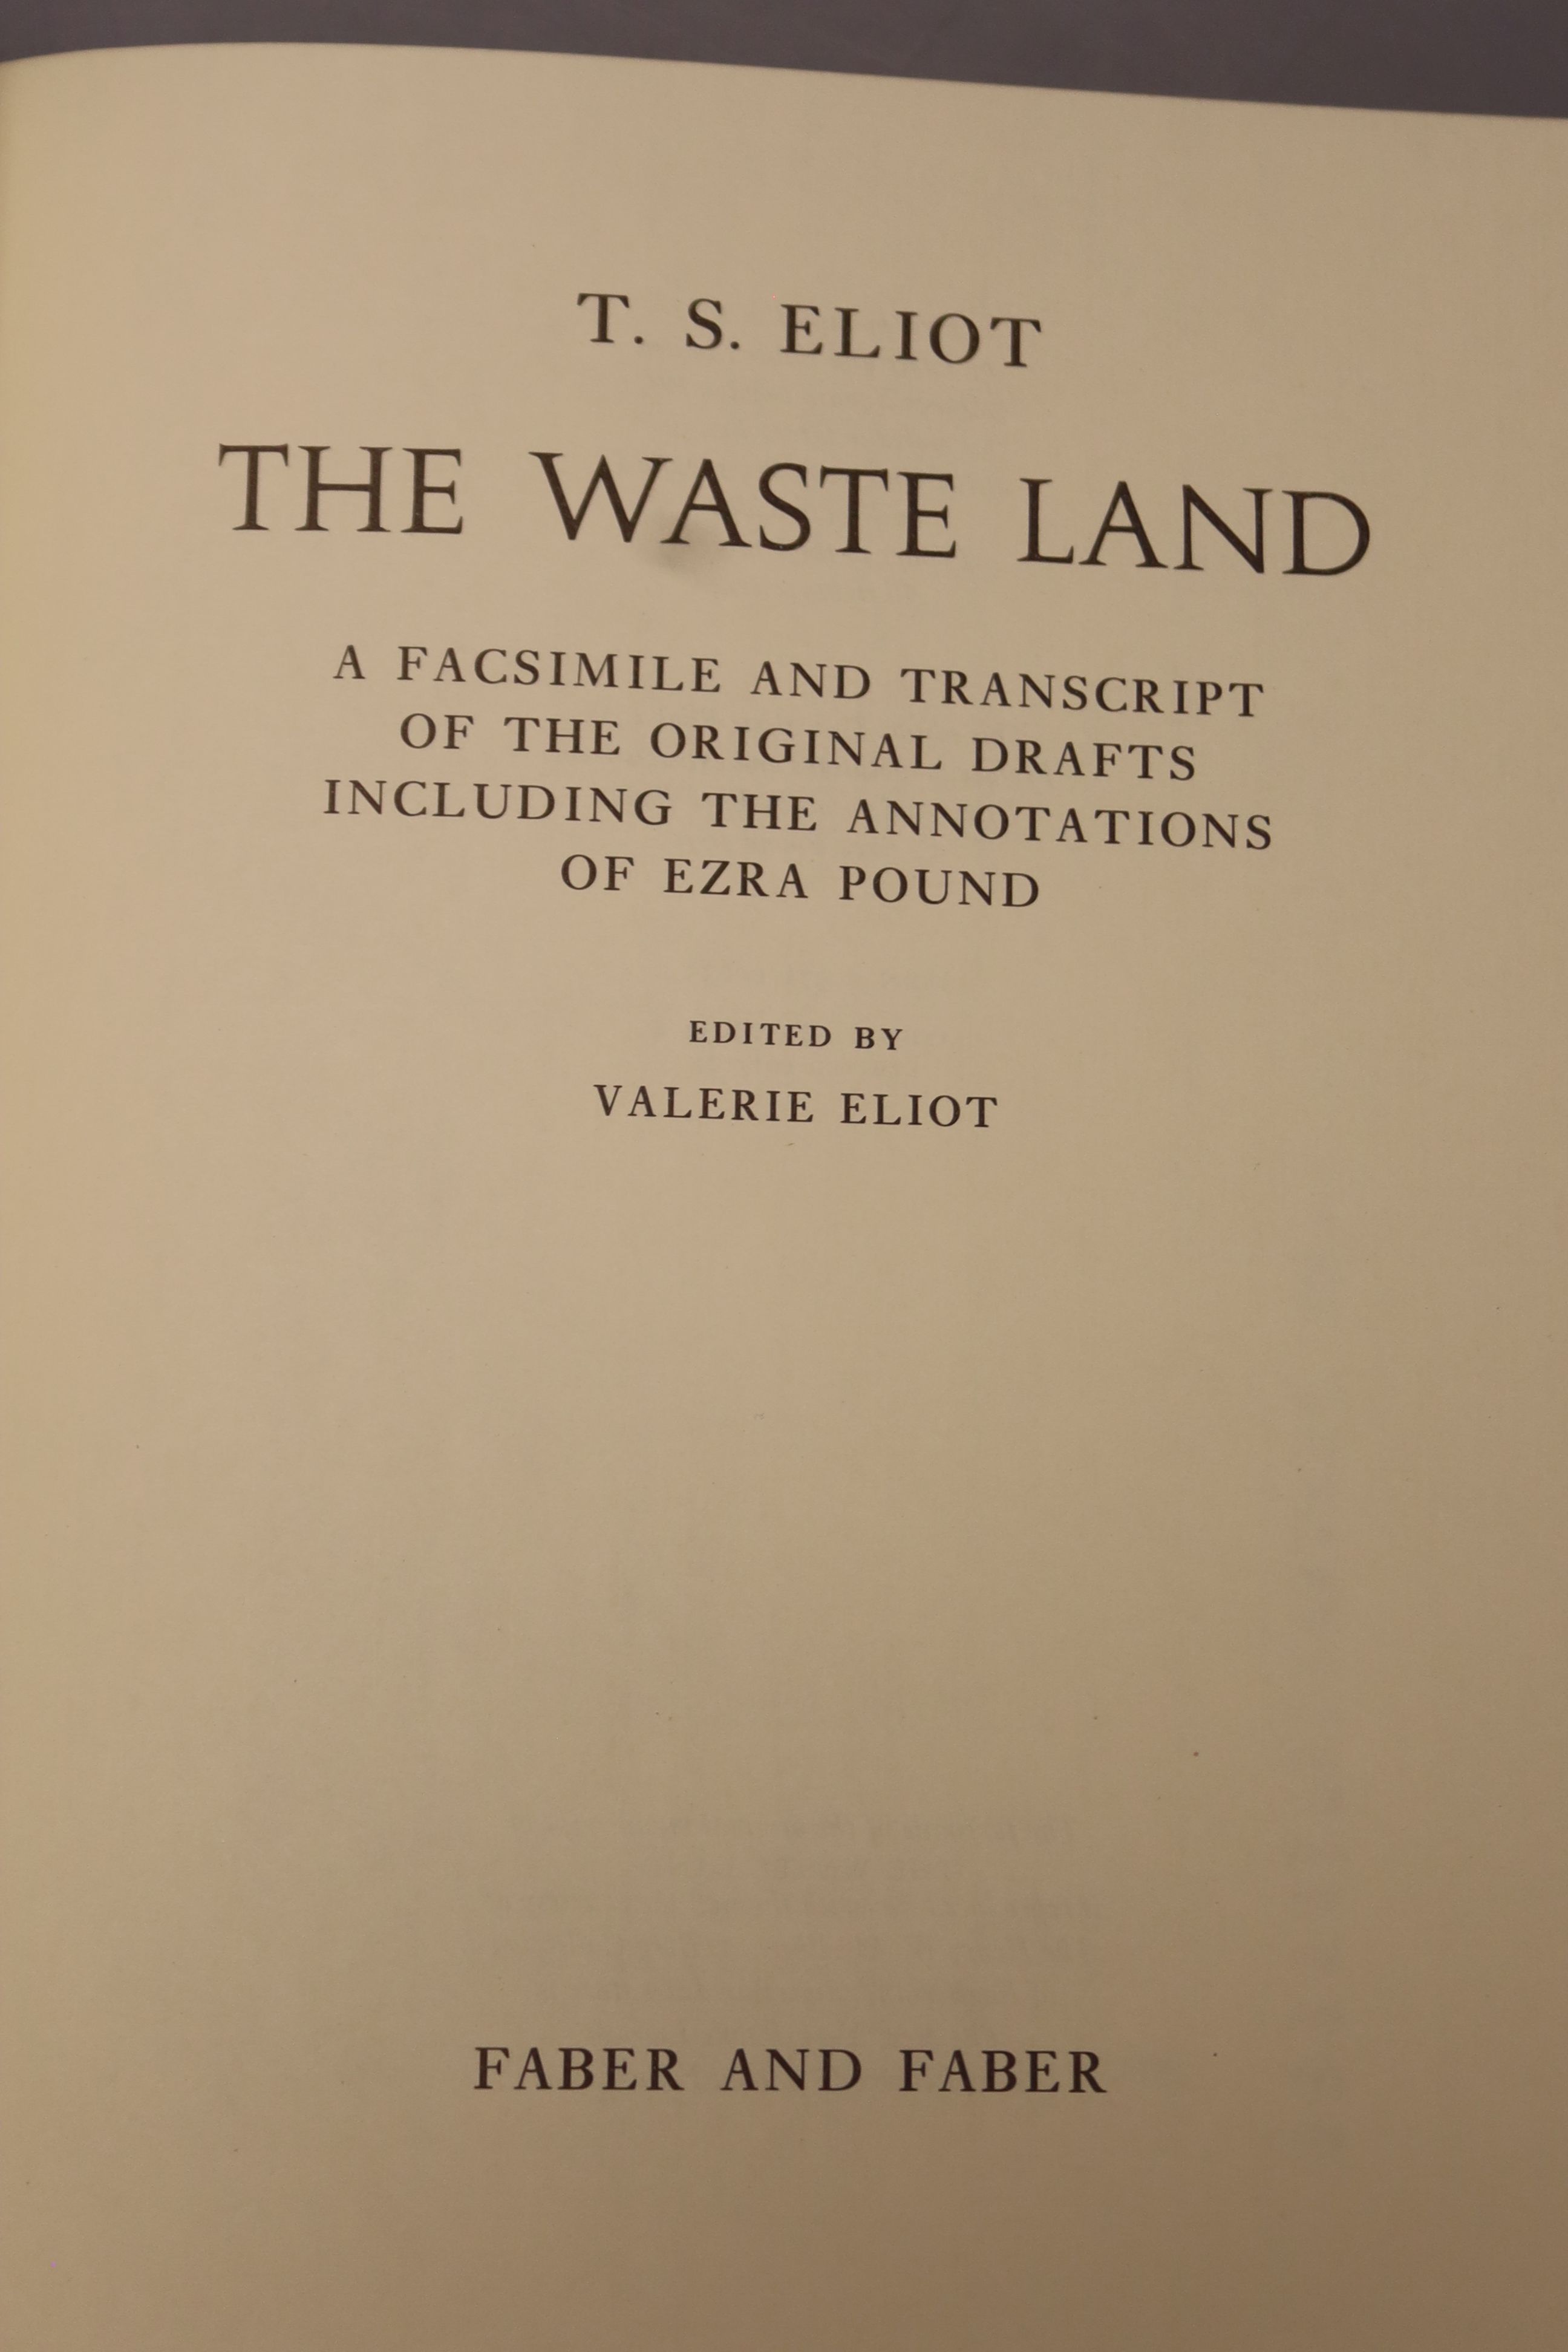 Eliot, T.S. – The Waste Land: a facsimile and transcript of the original drafts …, edited by Valerie Eliot, limited edition (500 numbered copies)